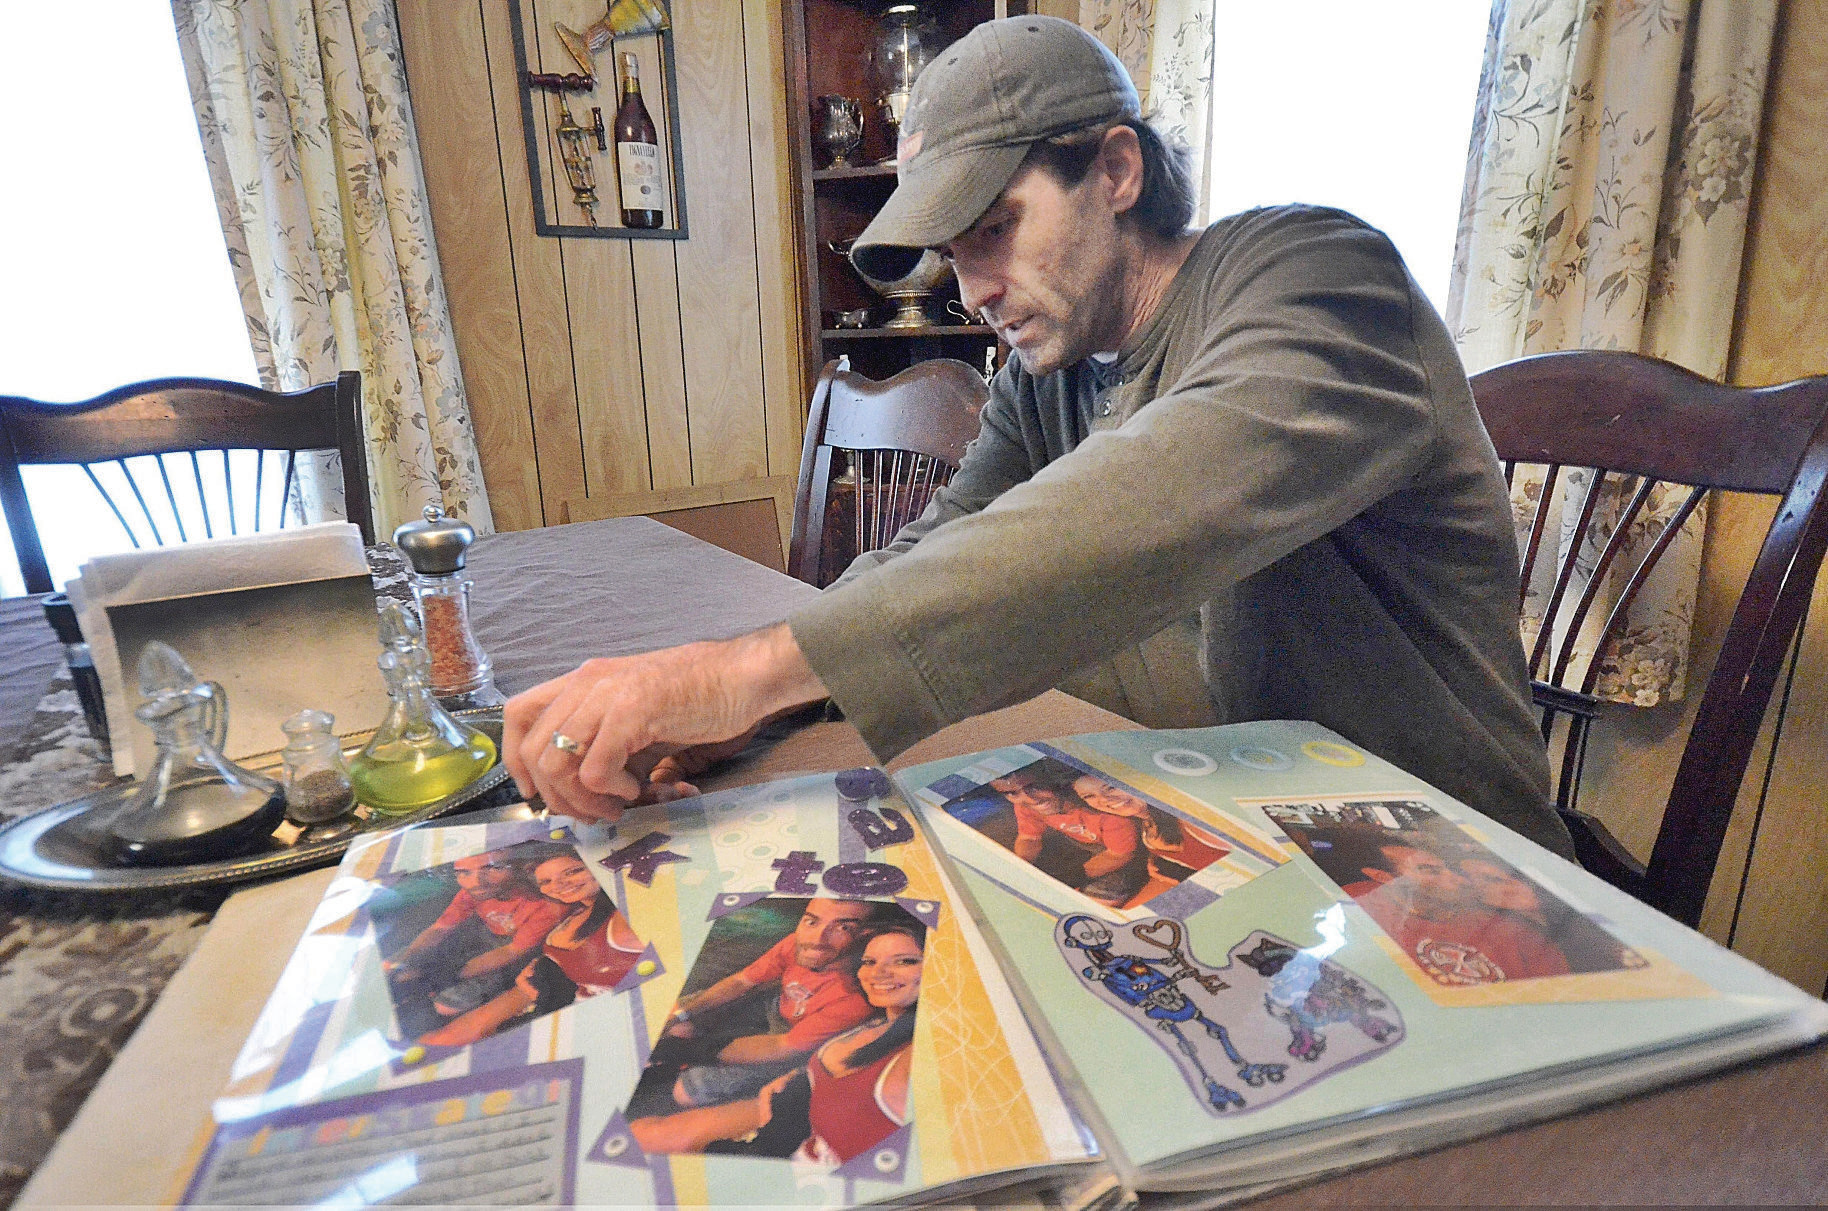 GILLIAN JONES — THE BERKSHIRE EAGLE Chad Reidy looks through an unfinished scrapbook made by his wife Joanne 'Jo' Ringer in their Clarksburg home which they have lived in together since October 2016. Ringer has been missing since March 2. Monday, March 27, 2017.